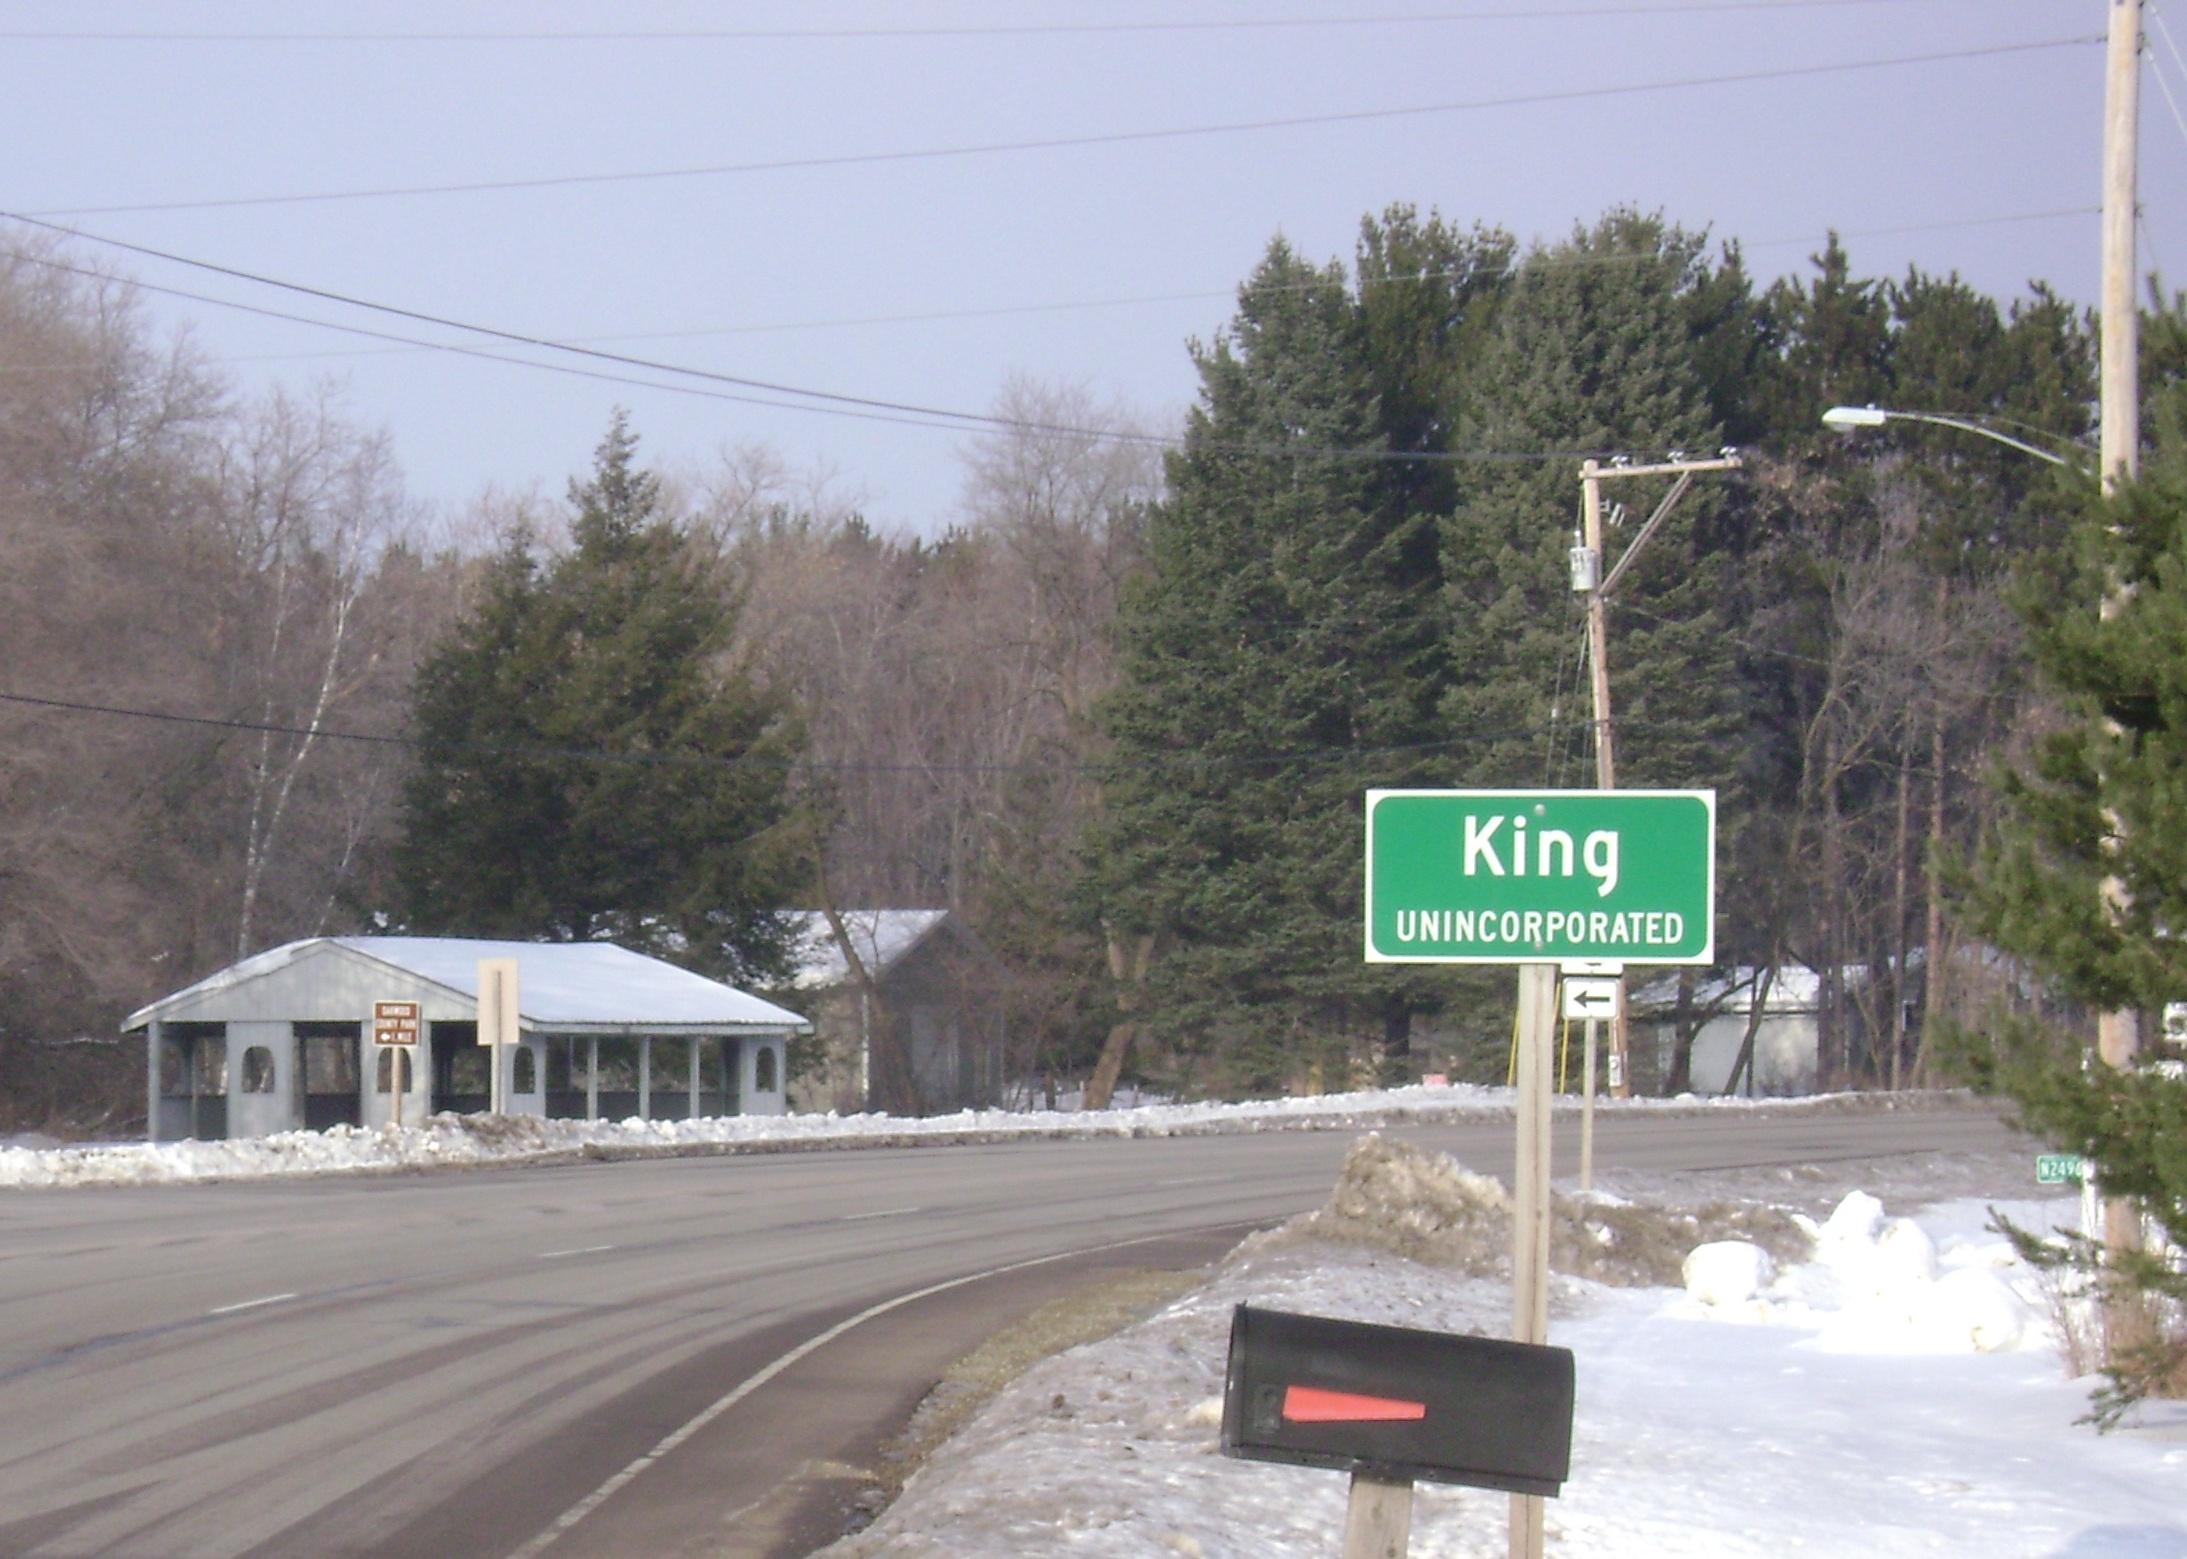 Highway sign for King, Wisconsin.